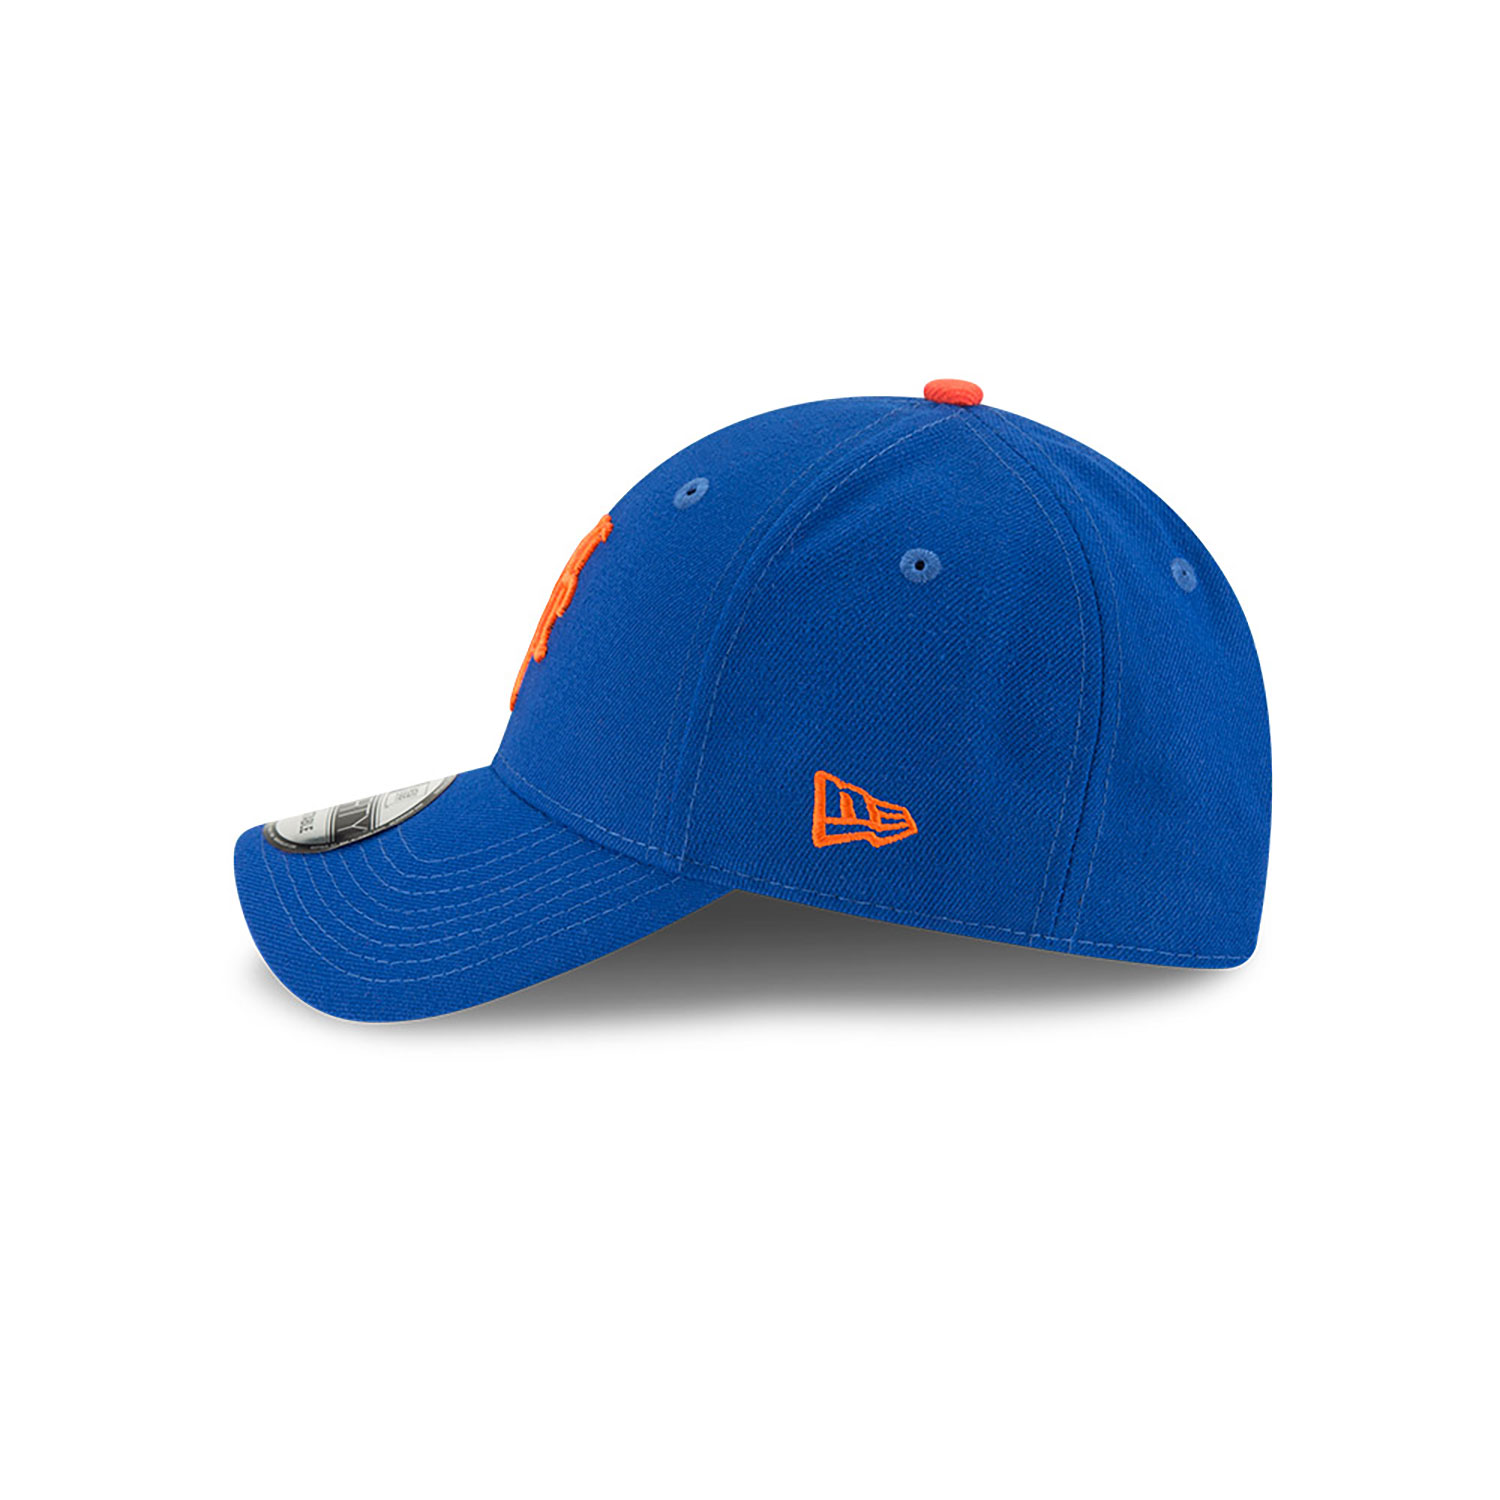 New York Mets Youth The League Blue 9FORTY Adjustable Cap